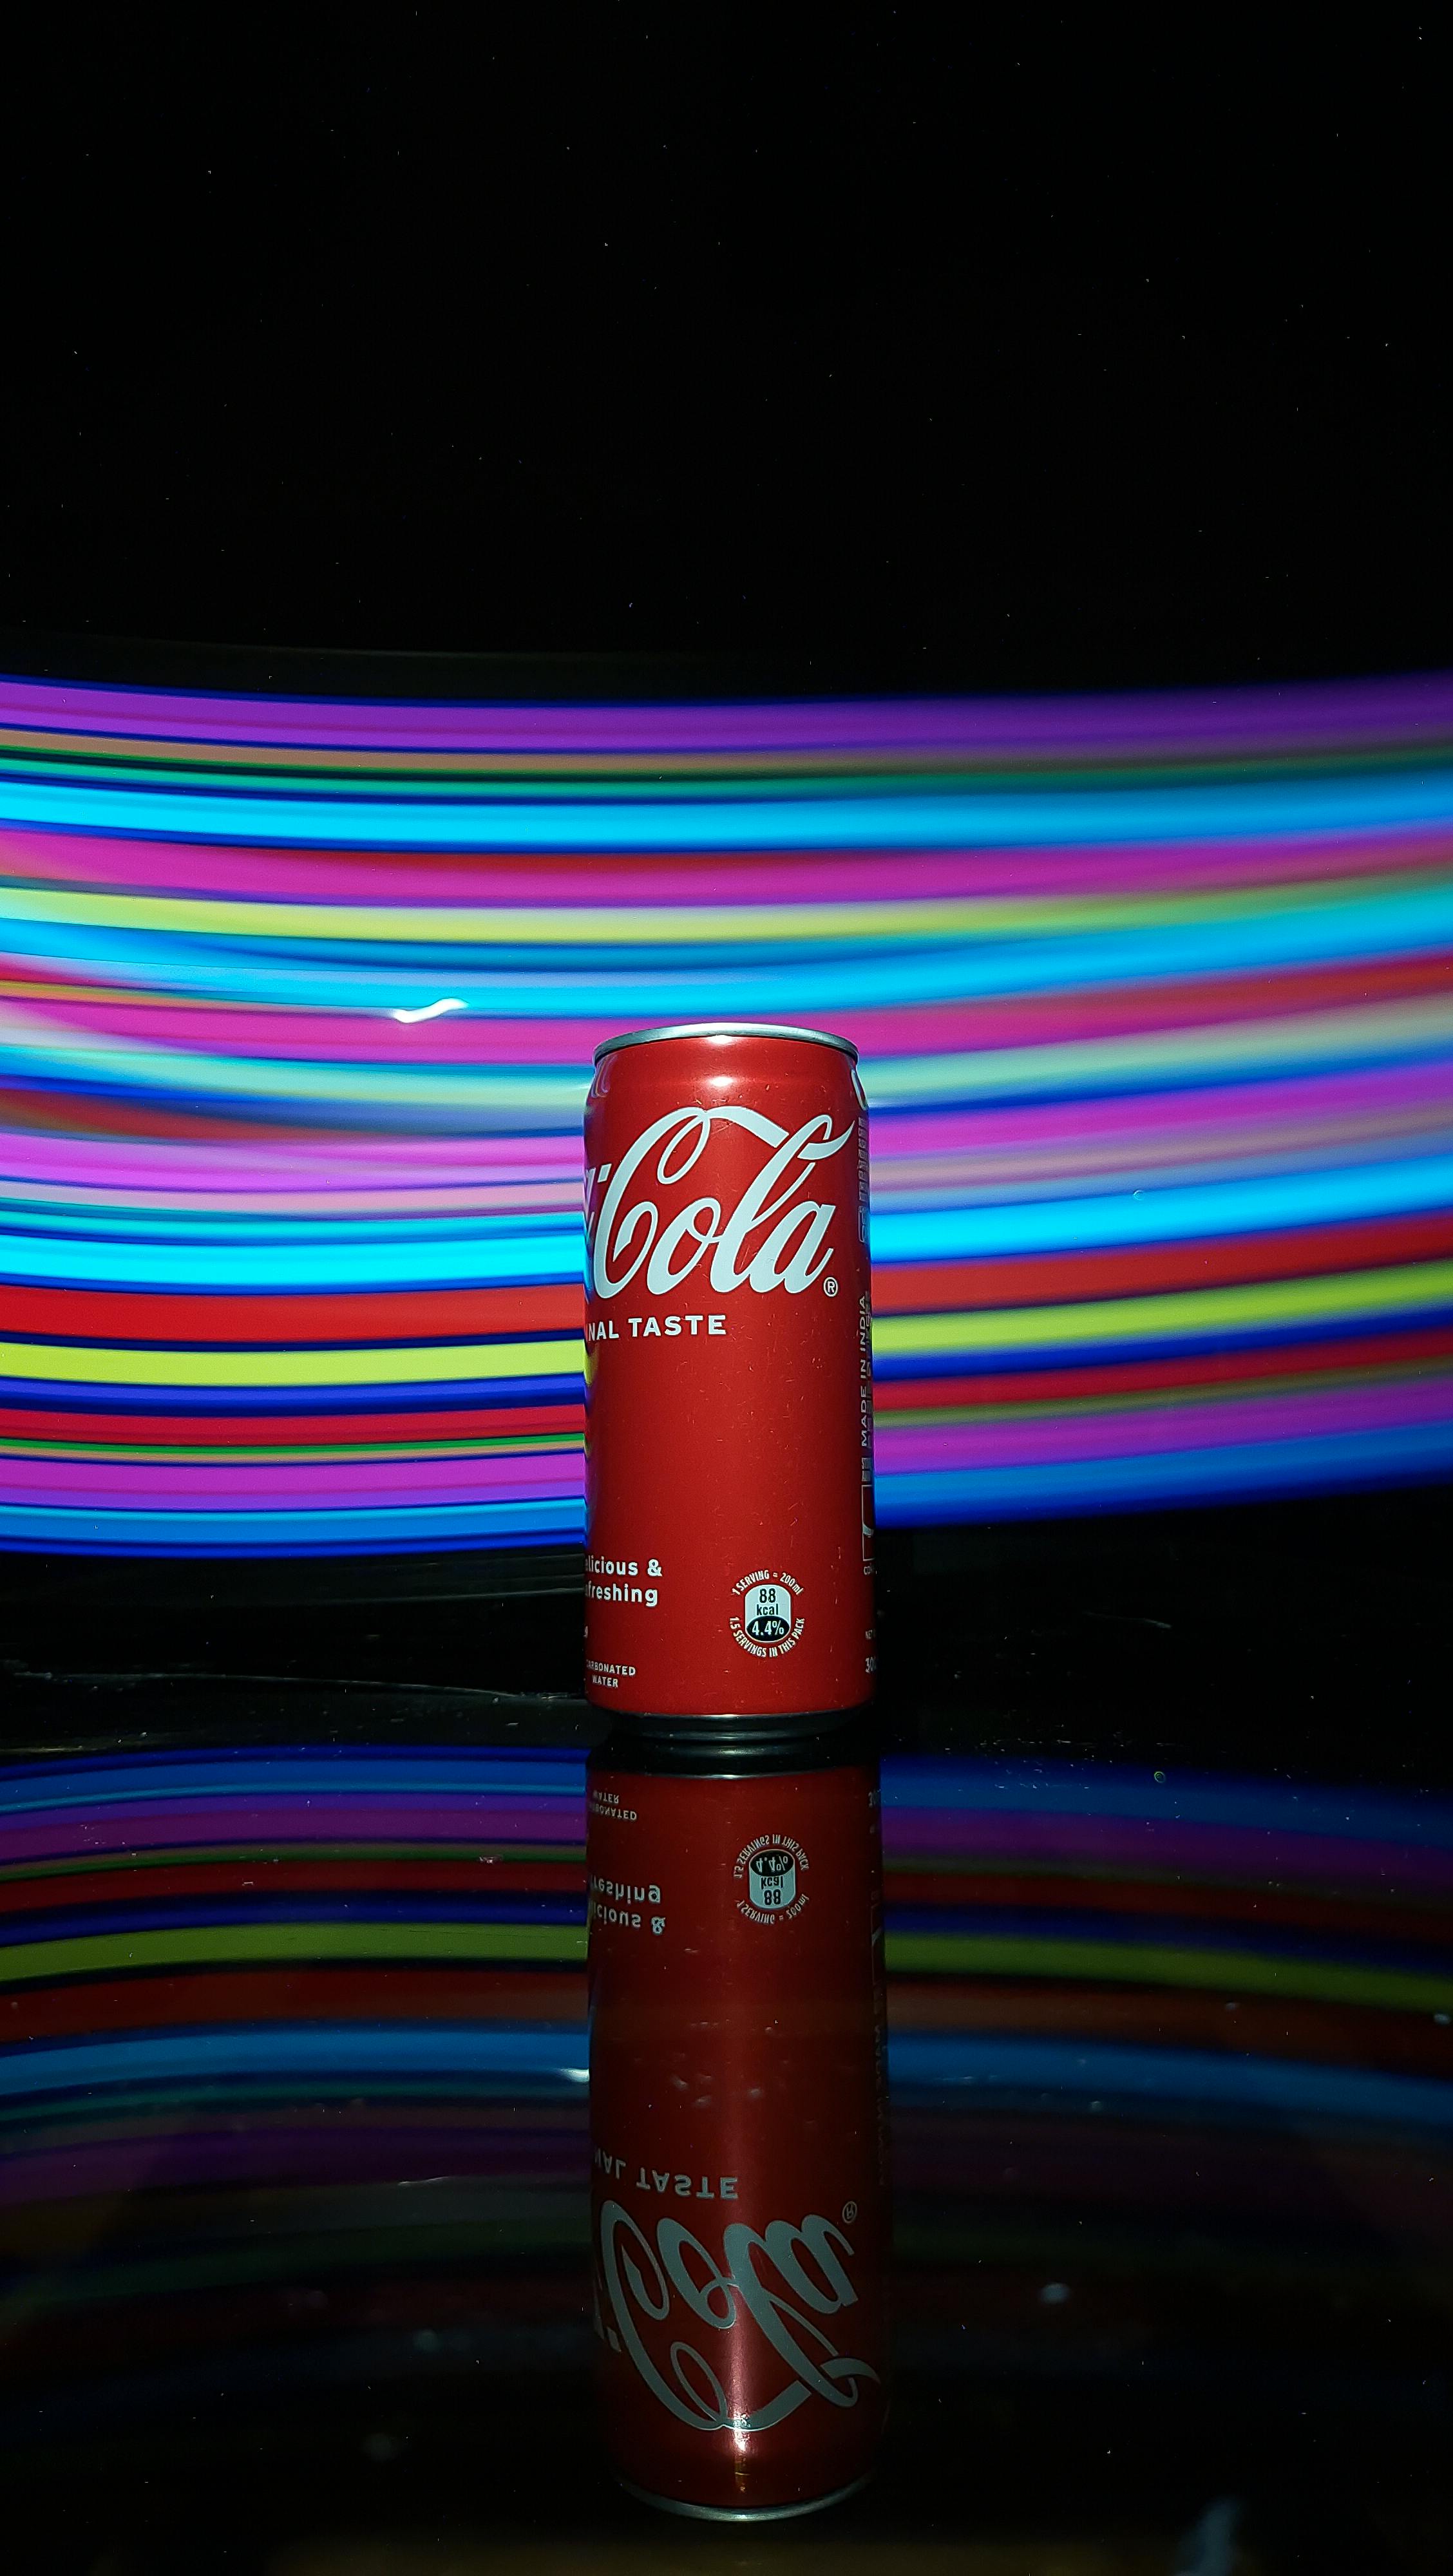 lightpainting of product